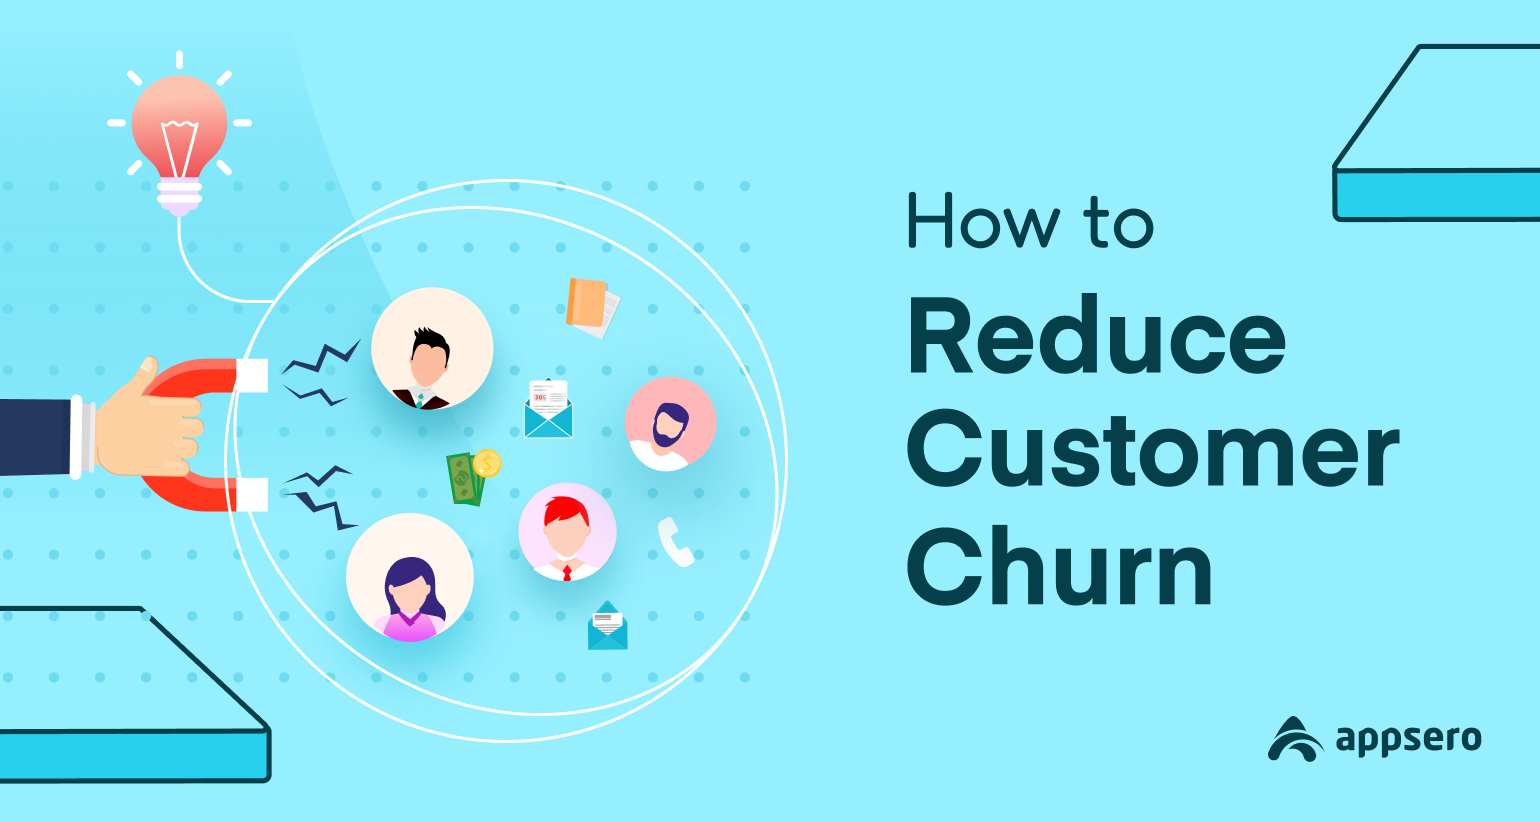 How to Reduce Customer Churn in 10 Proven Ways